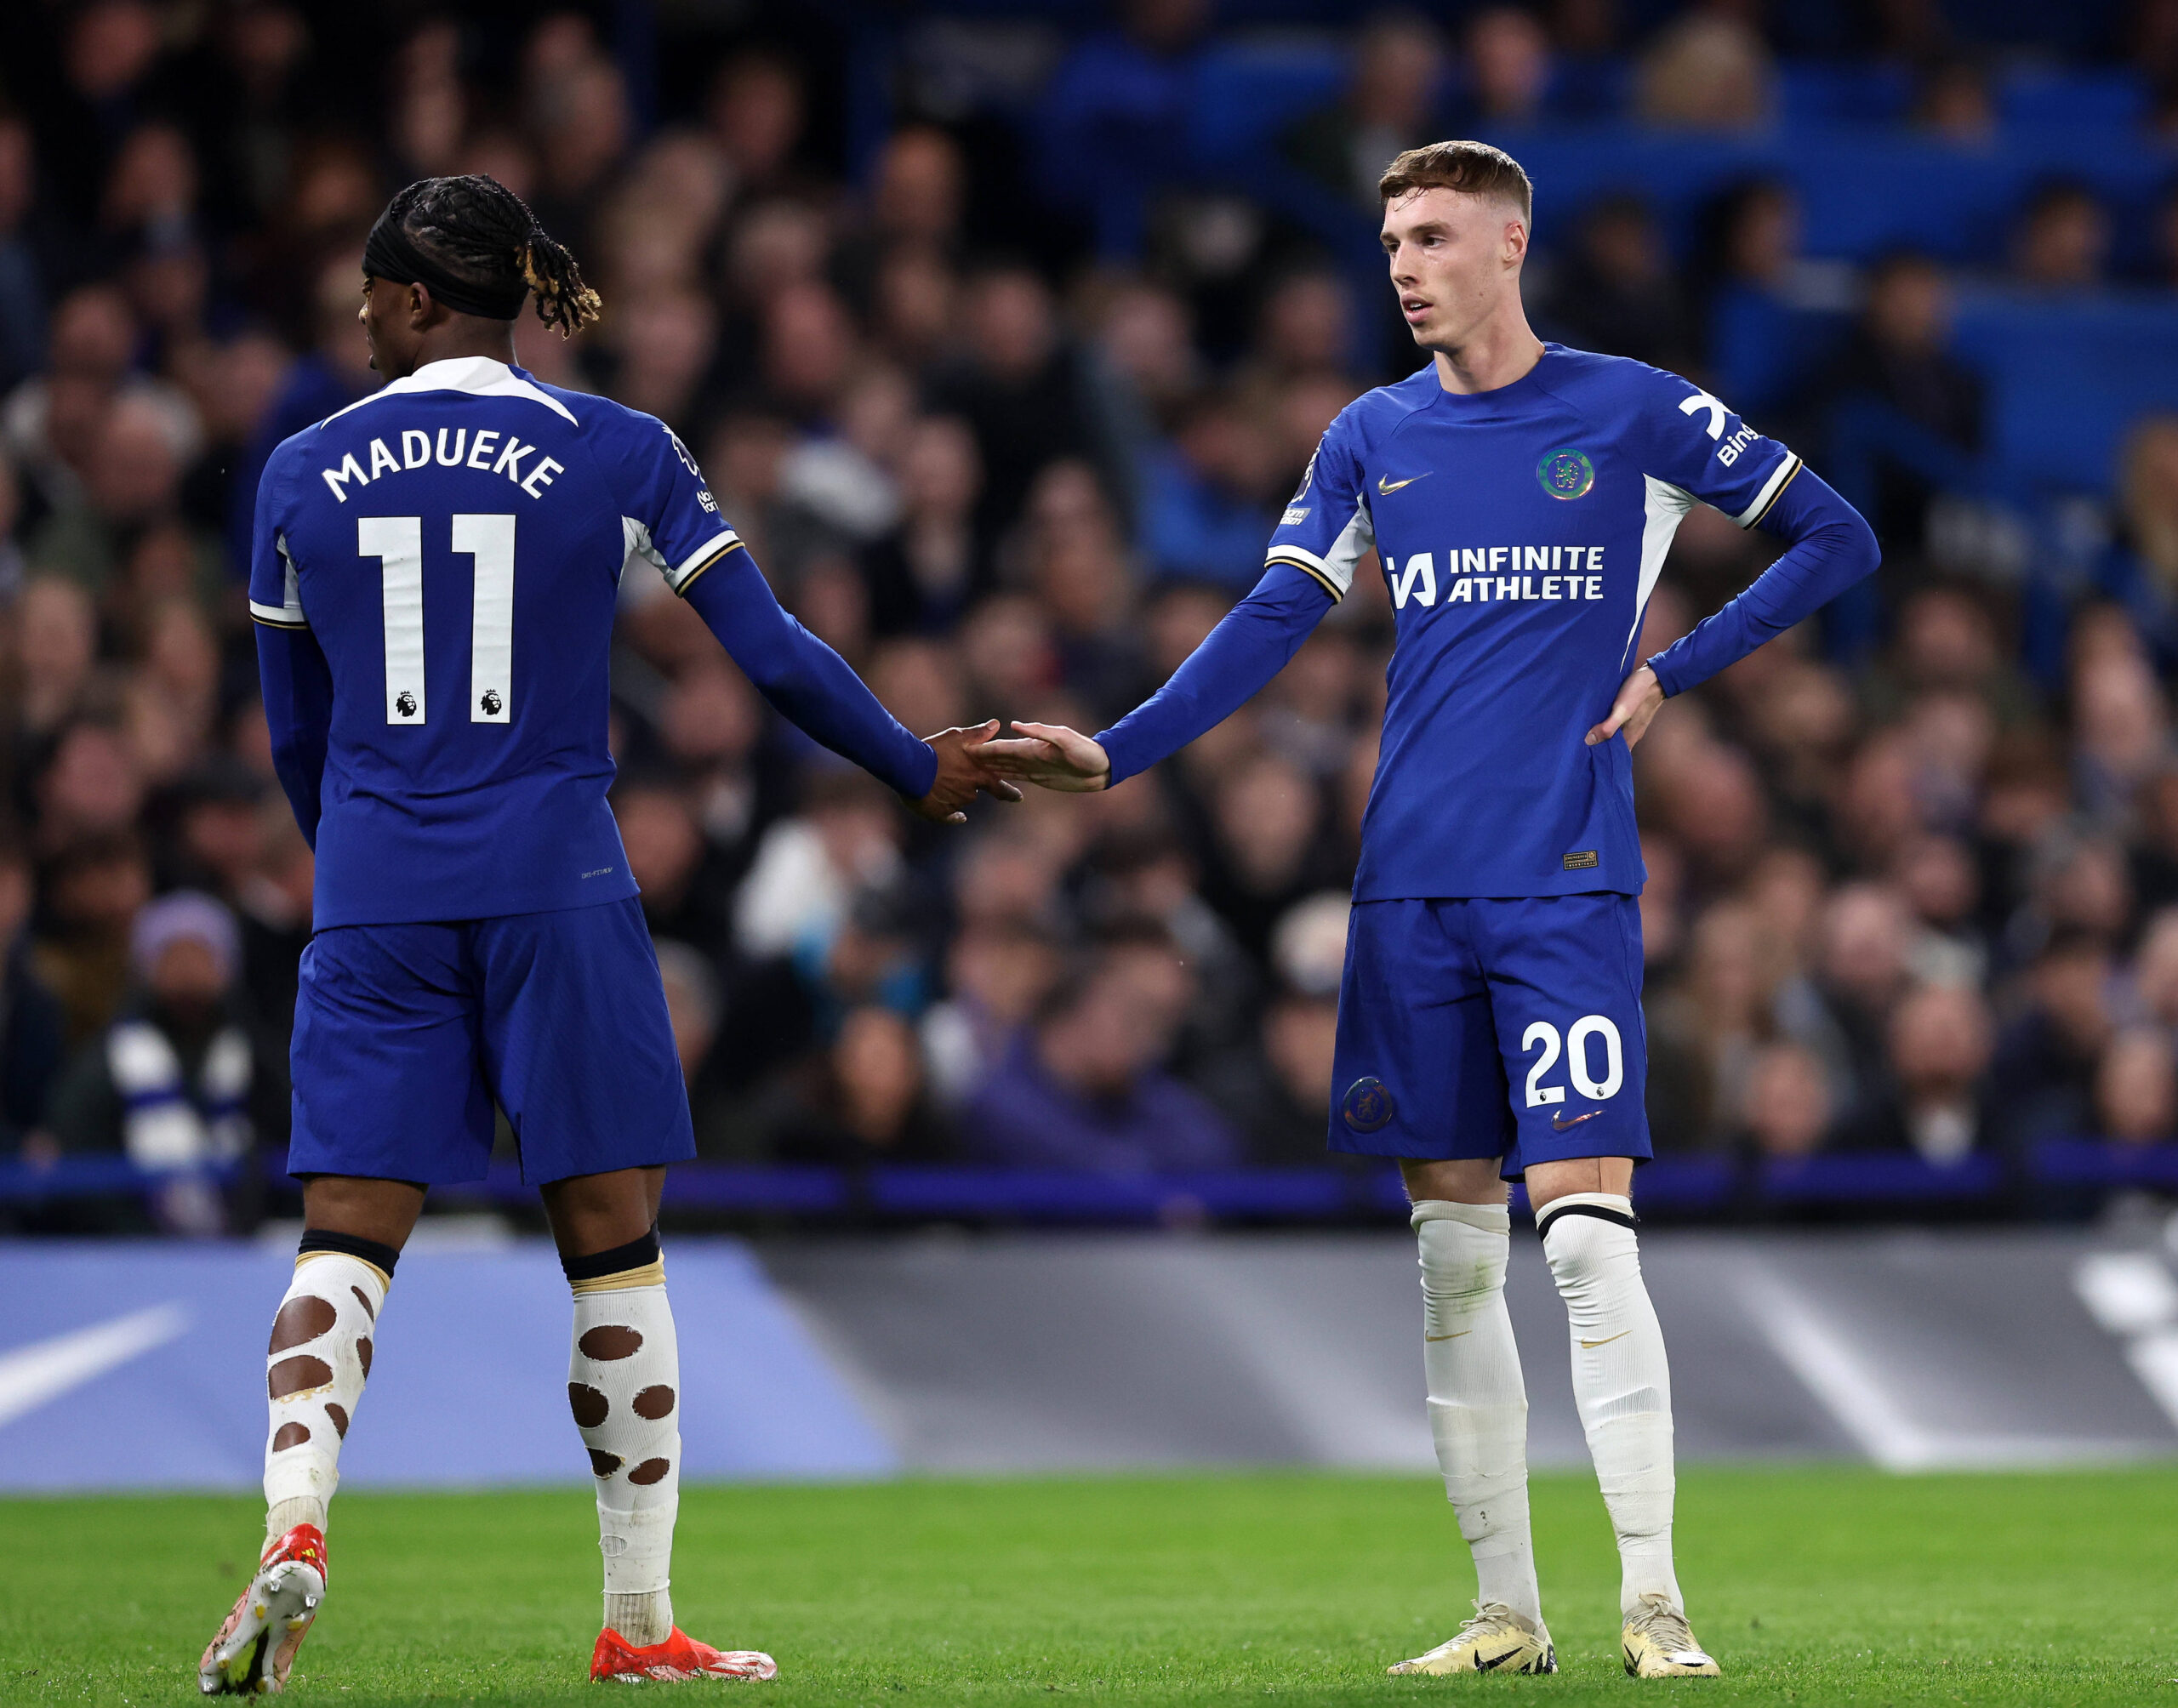 Top 3 Chelsea Players To Select For FPL Gameweek 36